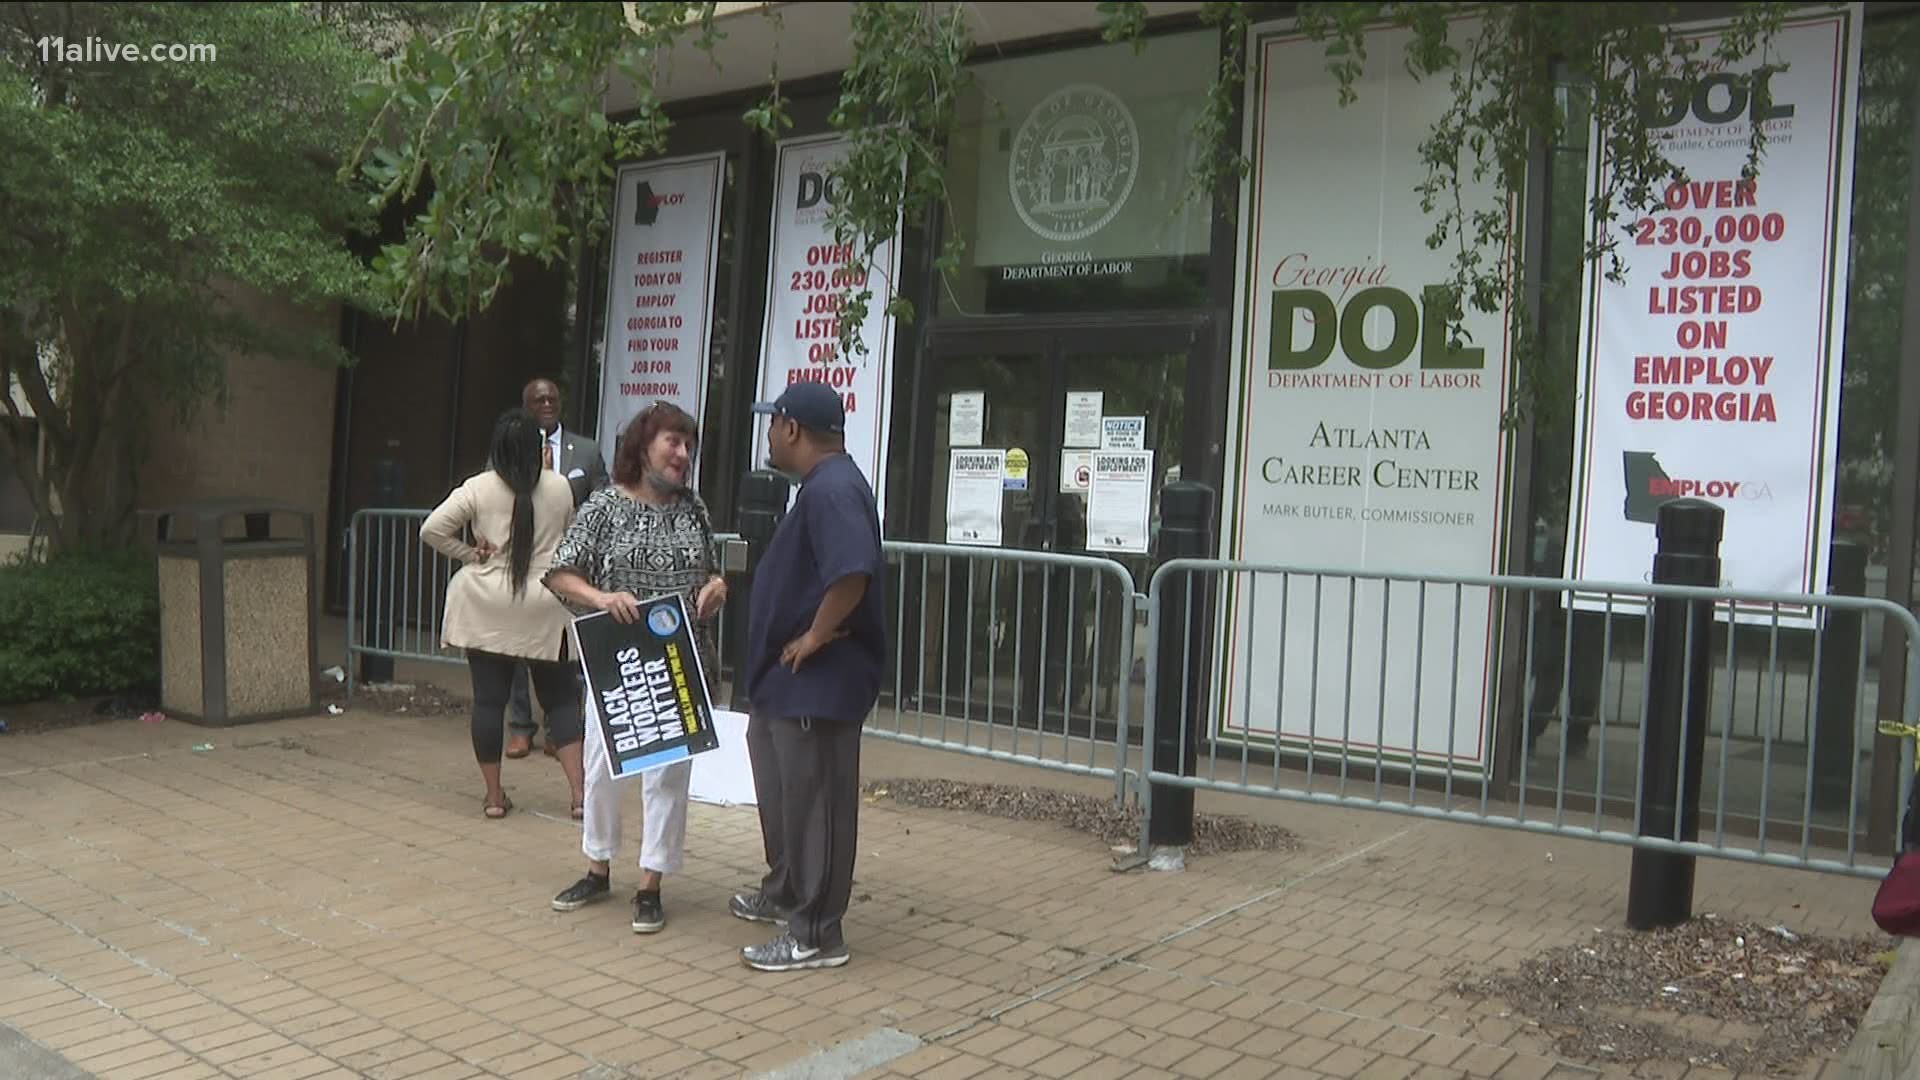 A protest is going on outside the Georgia Department of Labor offices.